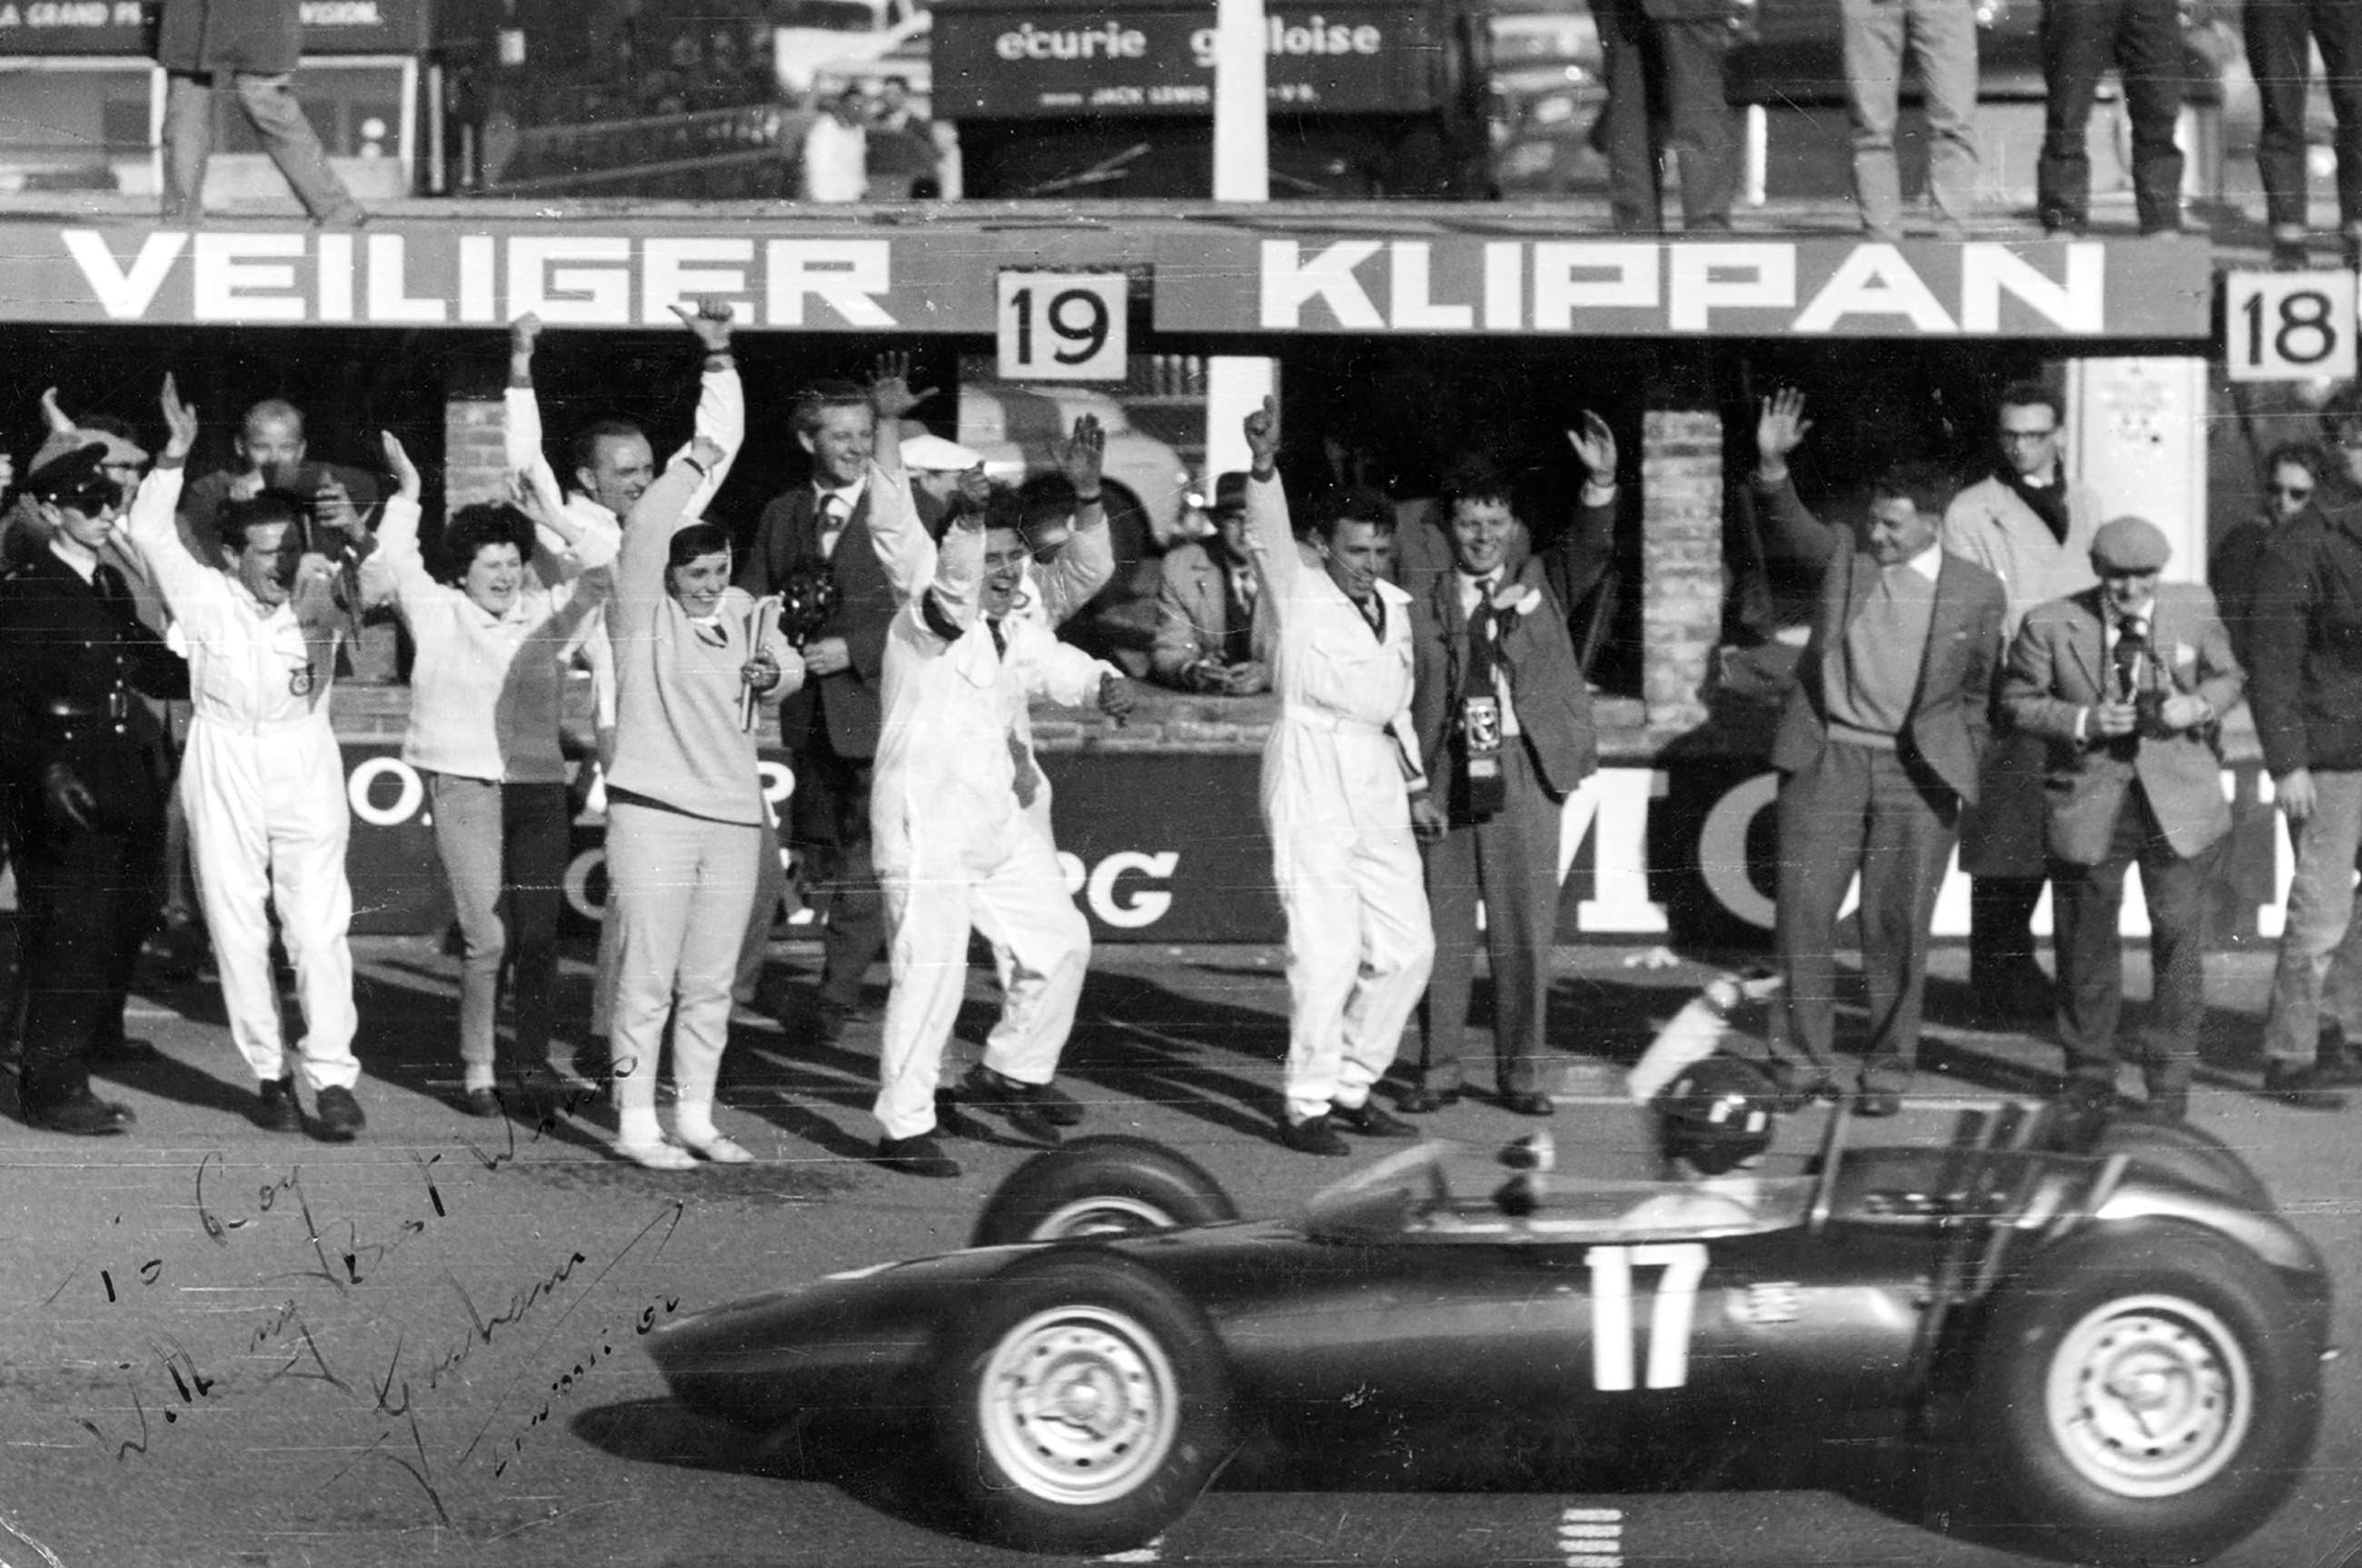 Graham Hill scores his maiden World Championship-qualifying GP win - the Dutch at Zandvoort - in the ‘Stackpipe’ BRM P578 - first step towards his 1962 Drivers’ World Championship title.